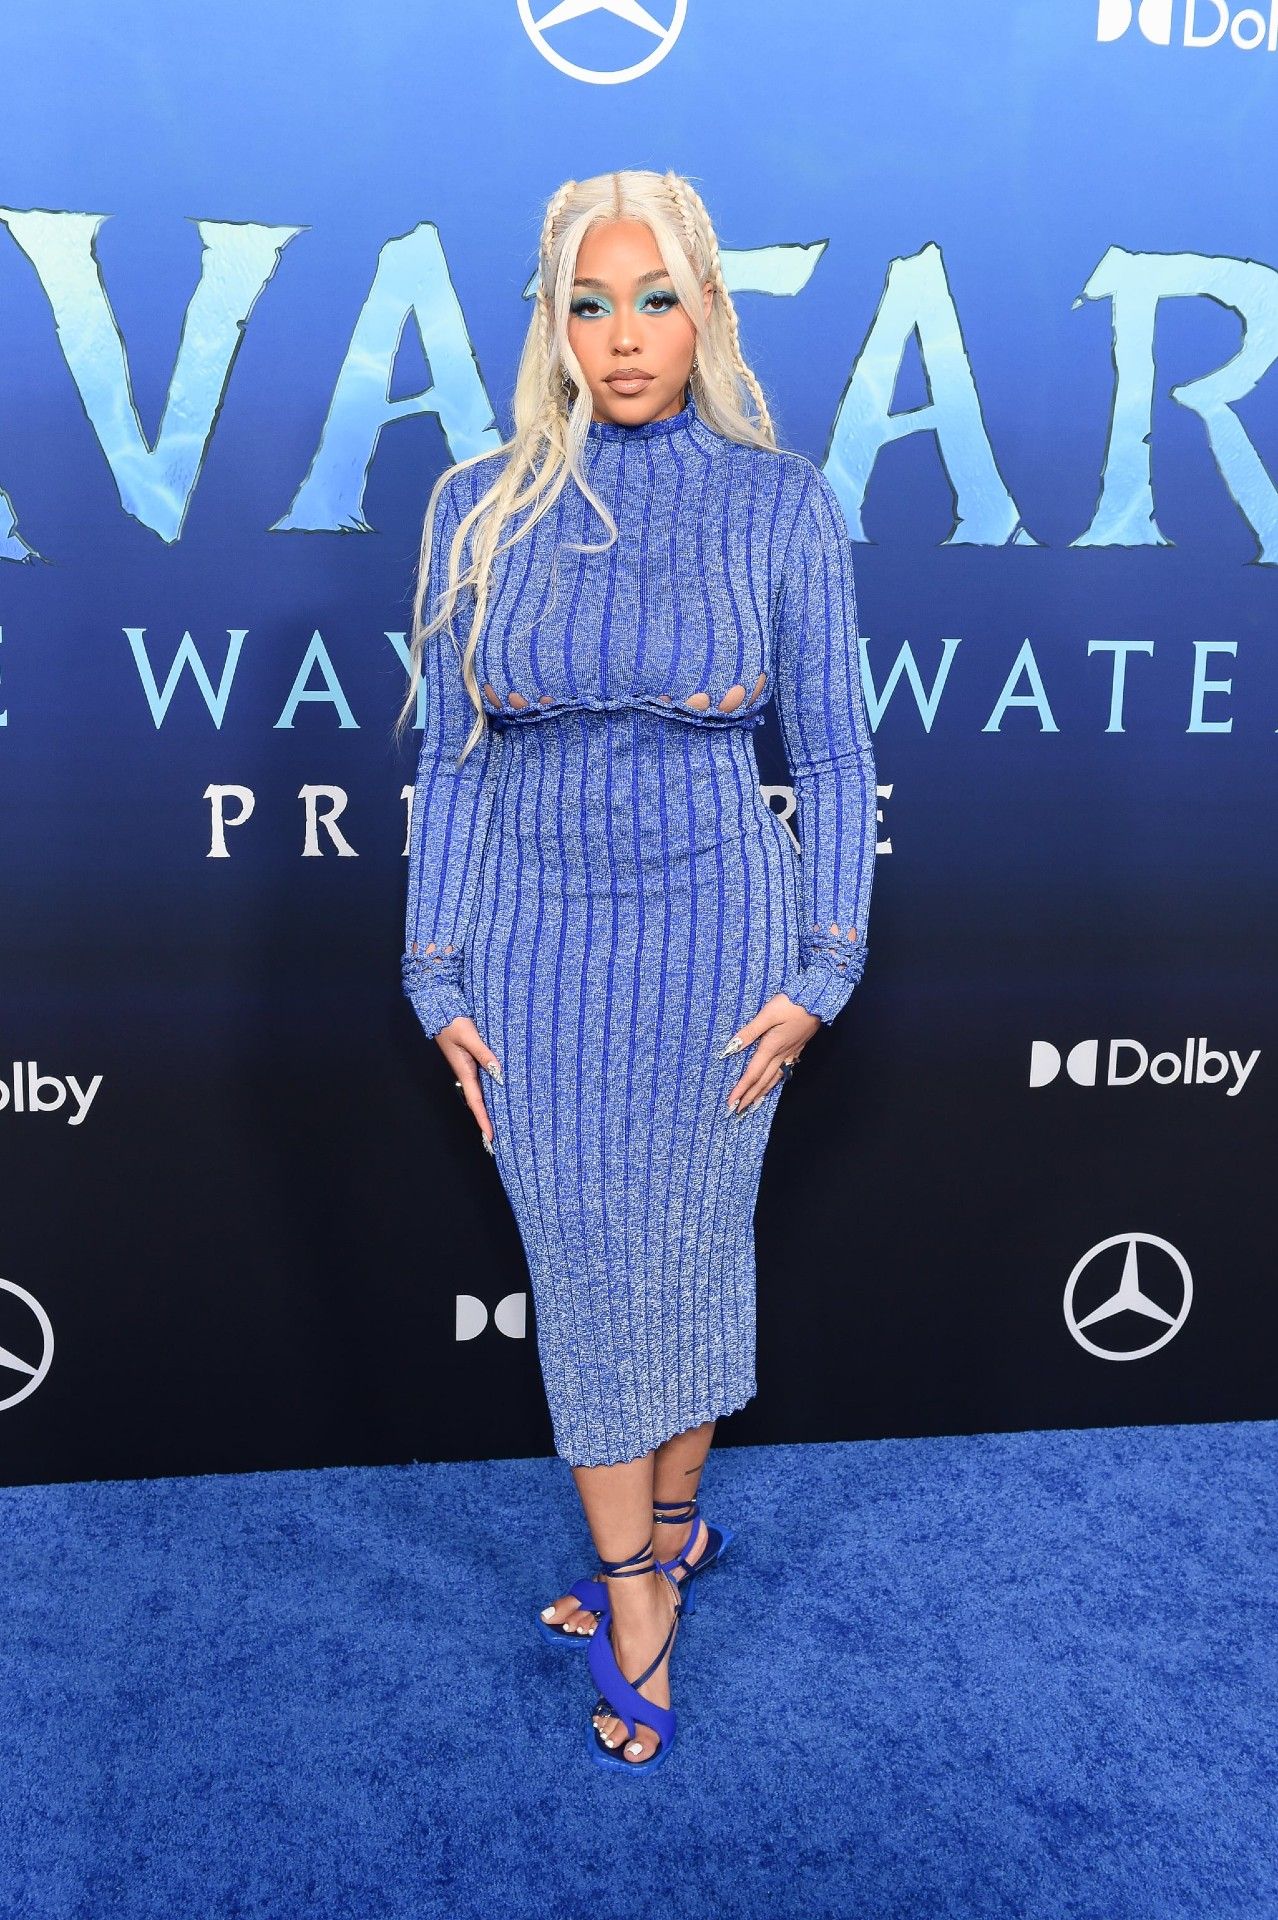 The Style of the Beautiful Singers at the Premiere of the Movie Avatar: The Waterway